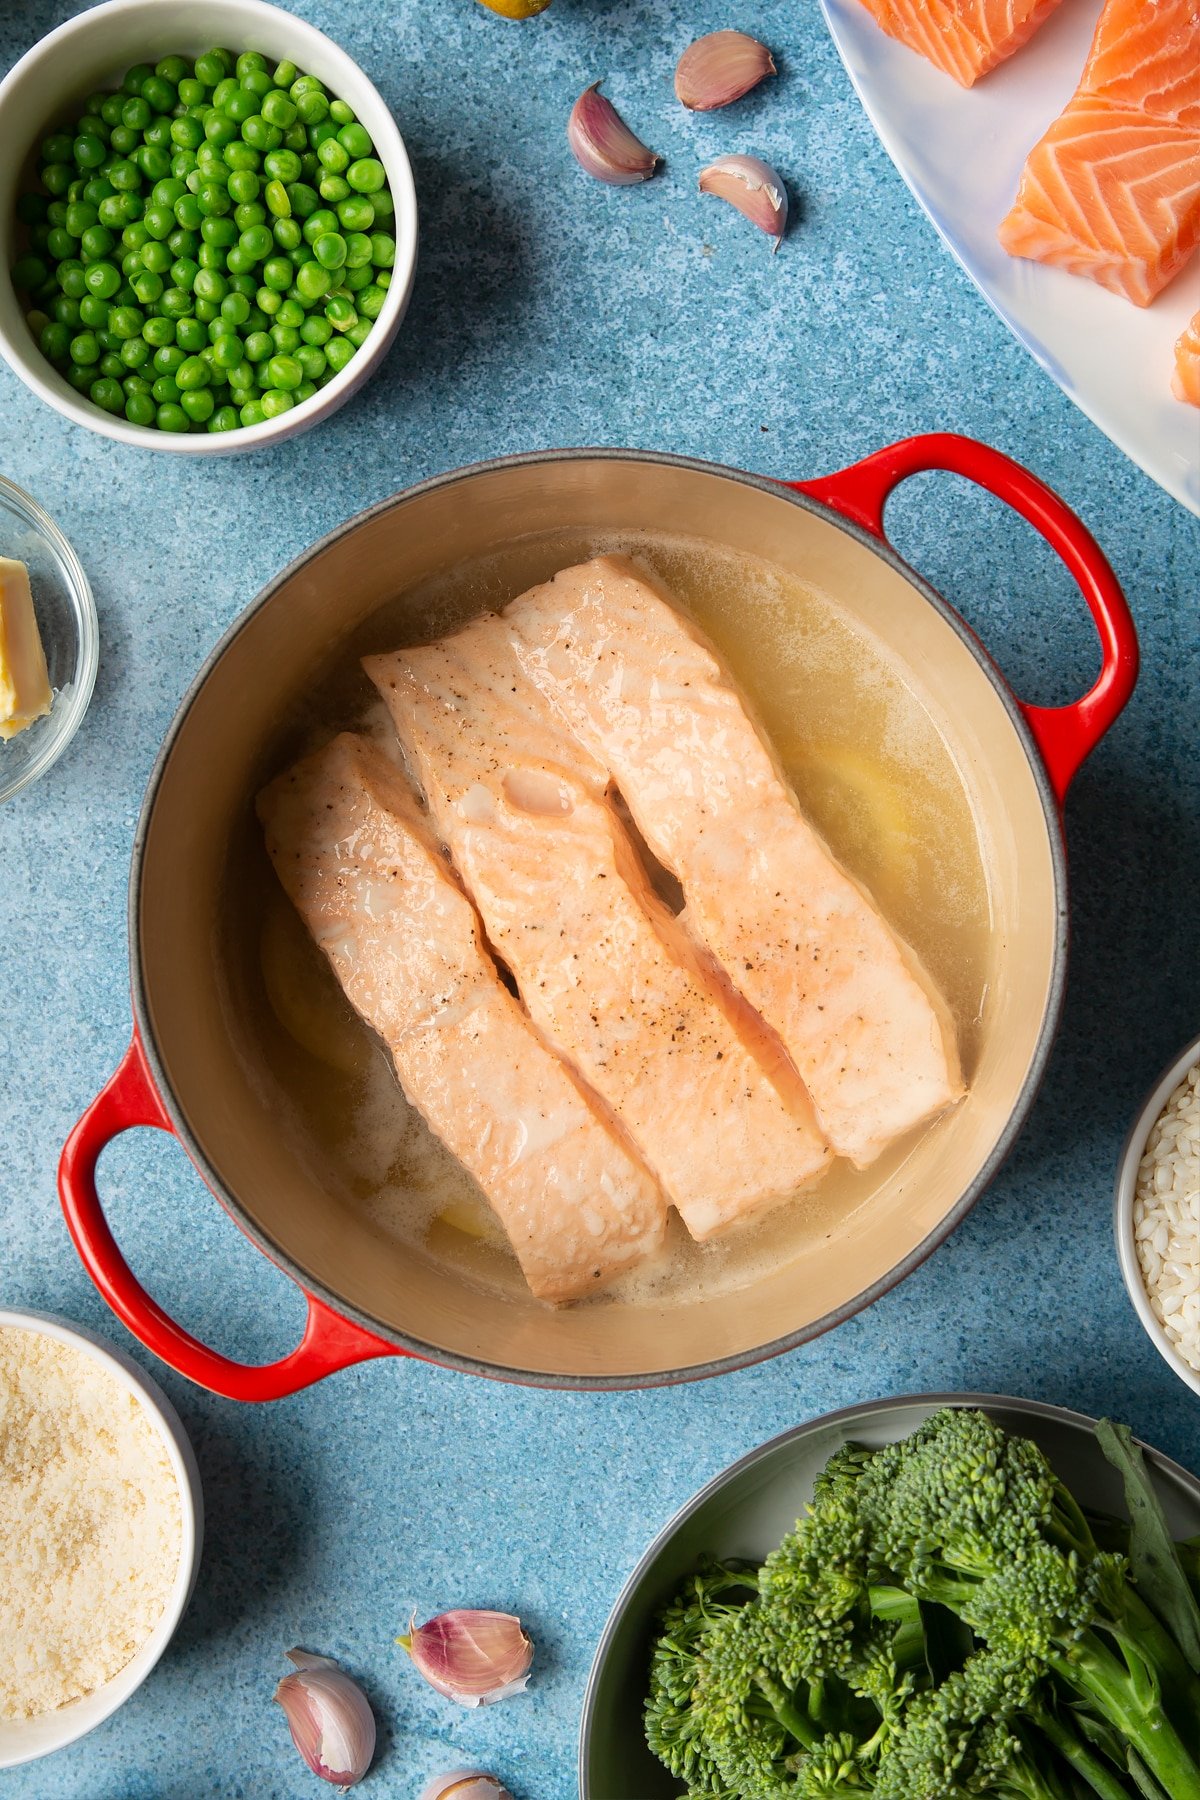 Steamed salmon fillets in a red saucepan. Ingredients to make salmon risotto surround the pan.